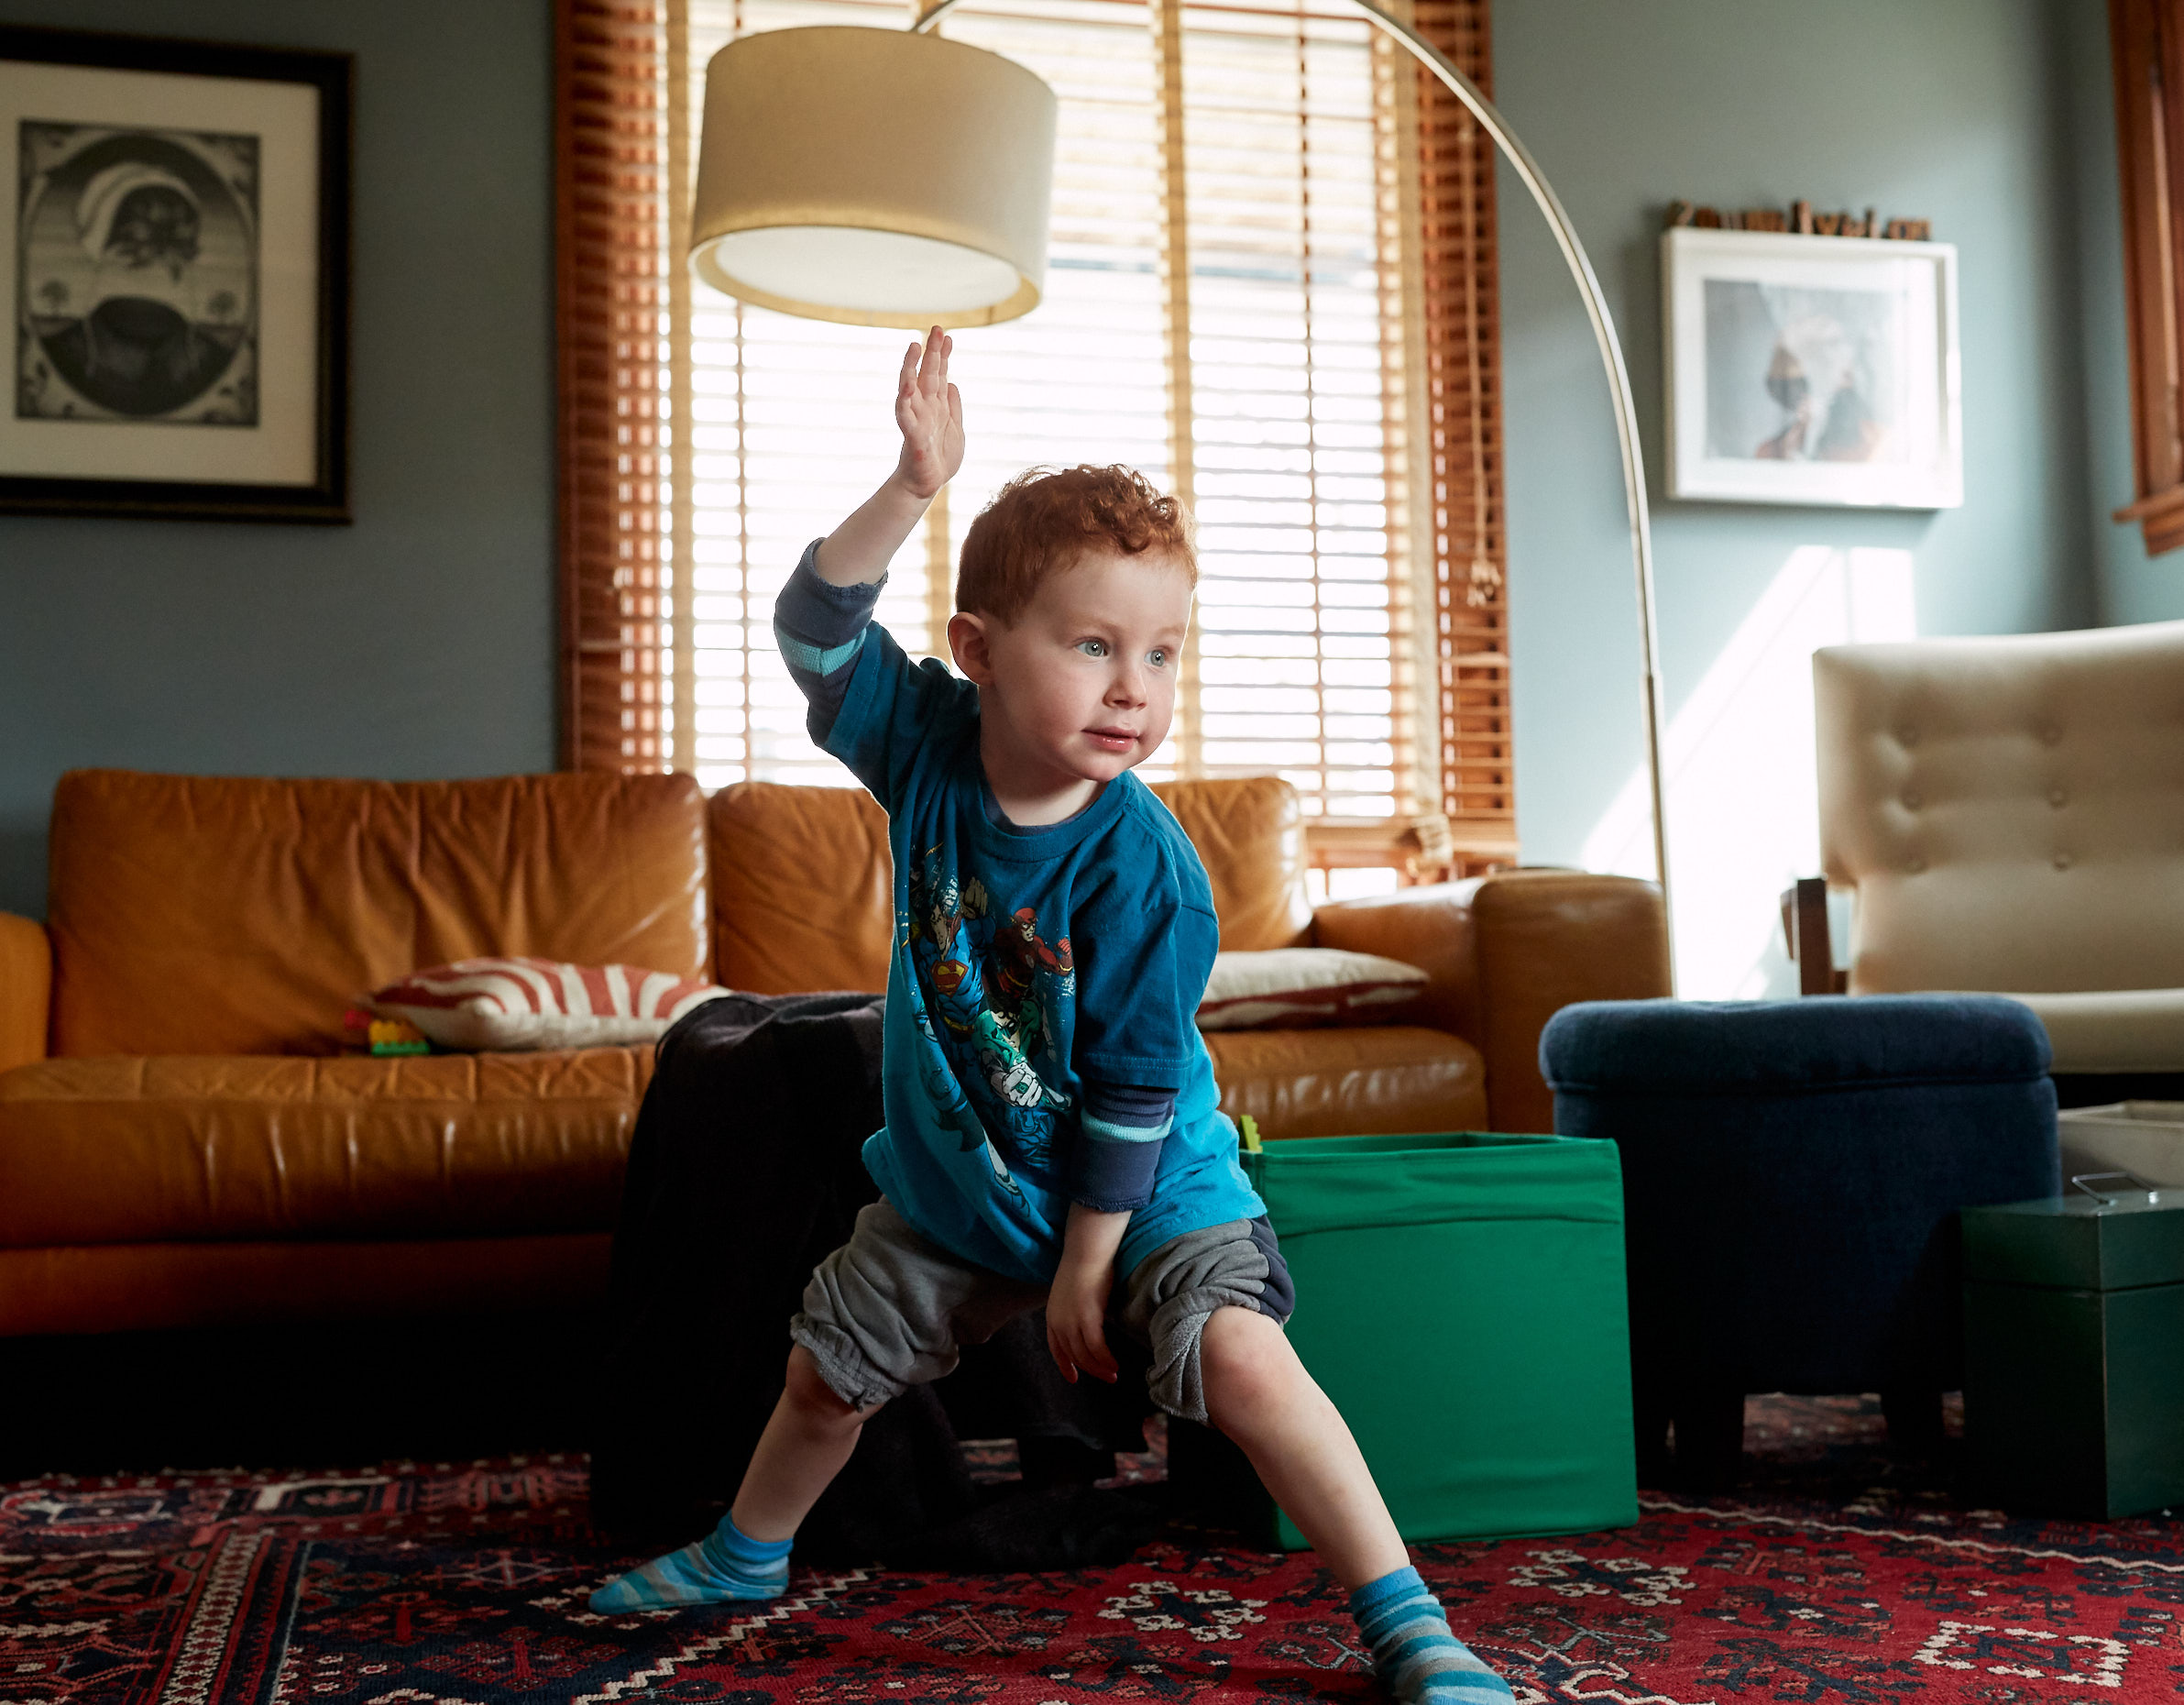 Small child doing yoga at home | Childrens photography by Saverio Truglia